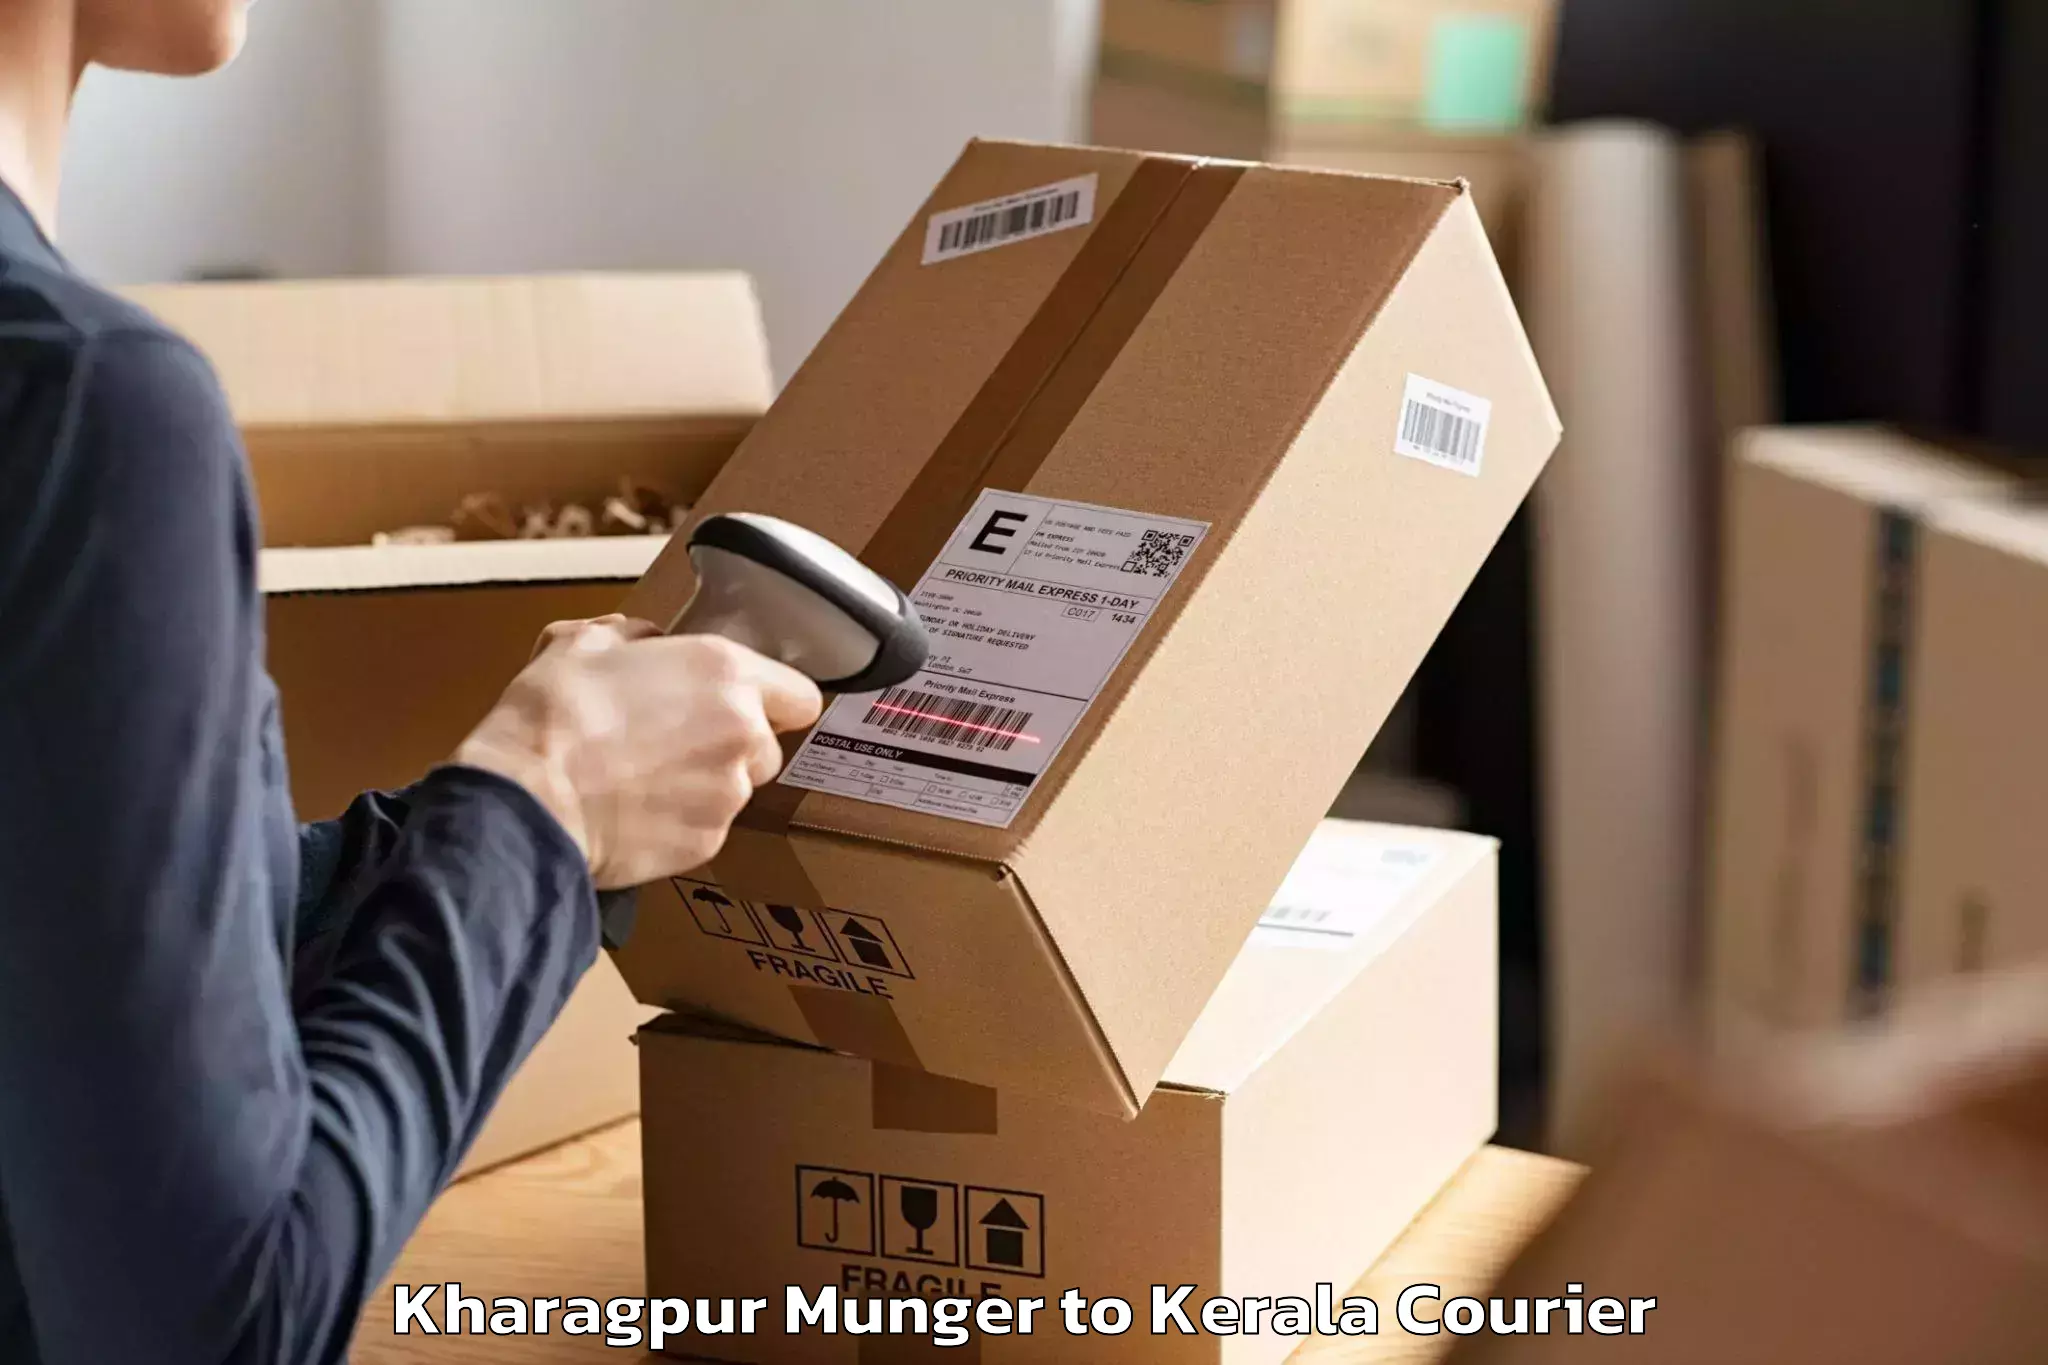 Tailored relocation services Kharagpur Munger to Kerala